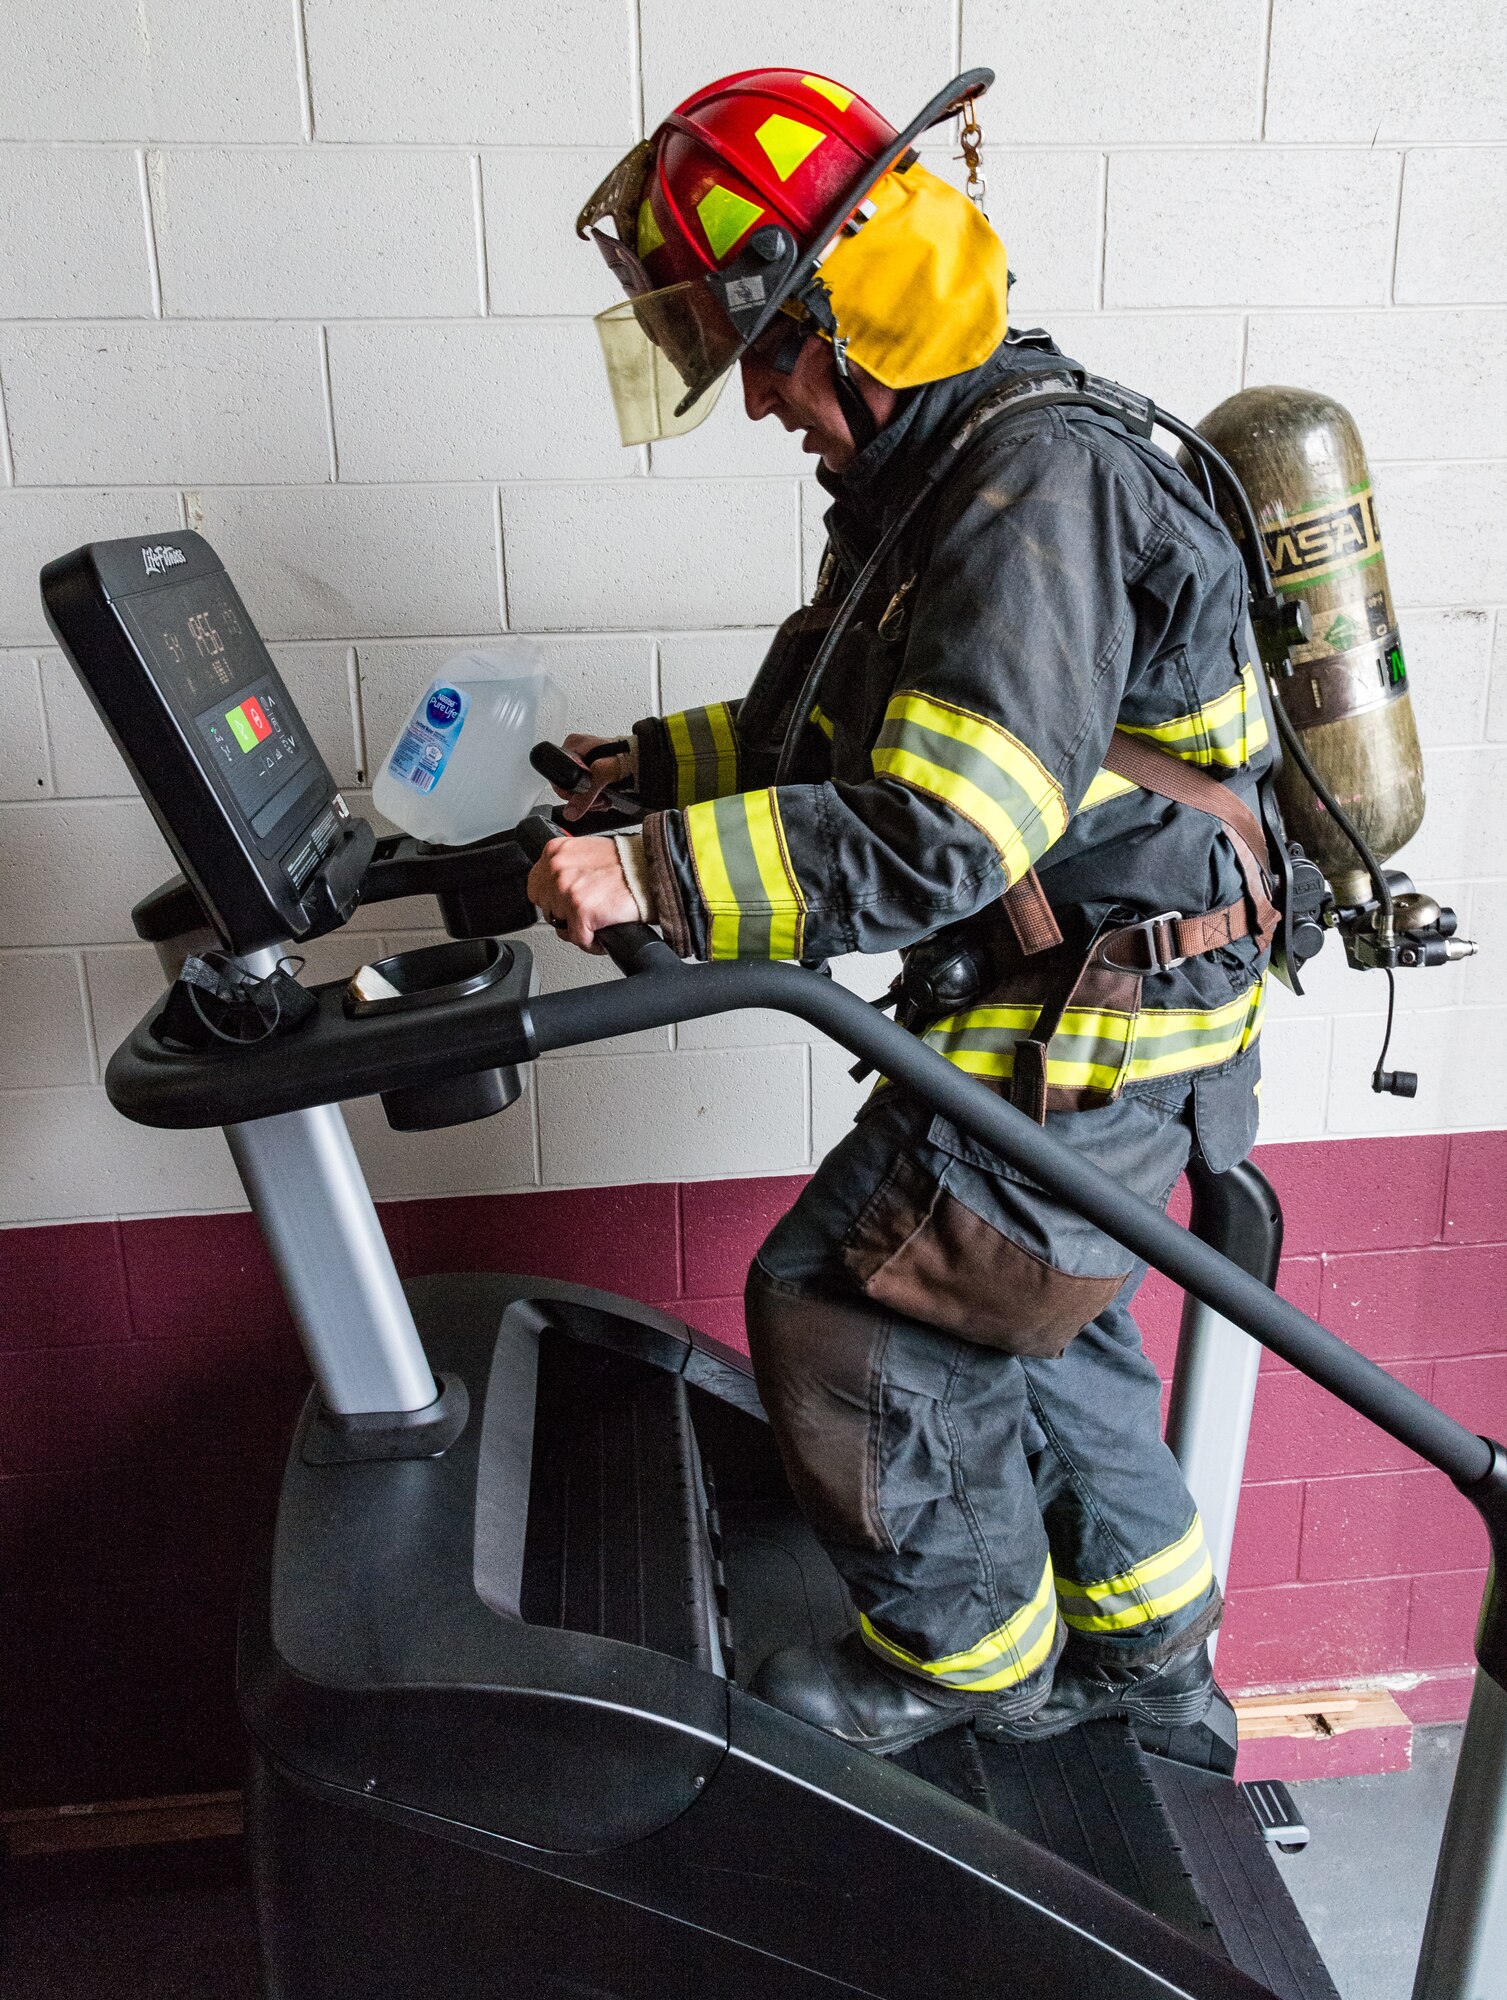 Tech. Sgt. Drew Thatcher, 436th Civil Engineer Squadron fire prevention noncommissioned officer in charge, climbs on a stair machine on Dover Air Force Base, Delaware, Sept. 9, 2021. Wearing fire protection gear, Thatcher climbed 110 stories, the same amount as the World Trade Center towers. (U.S. Air Force photo by Roland Balik)